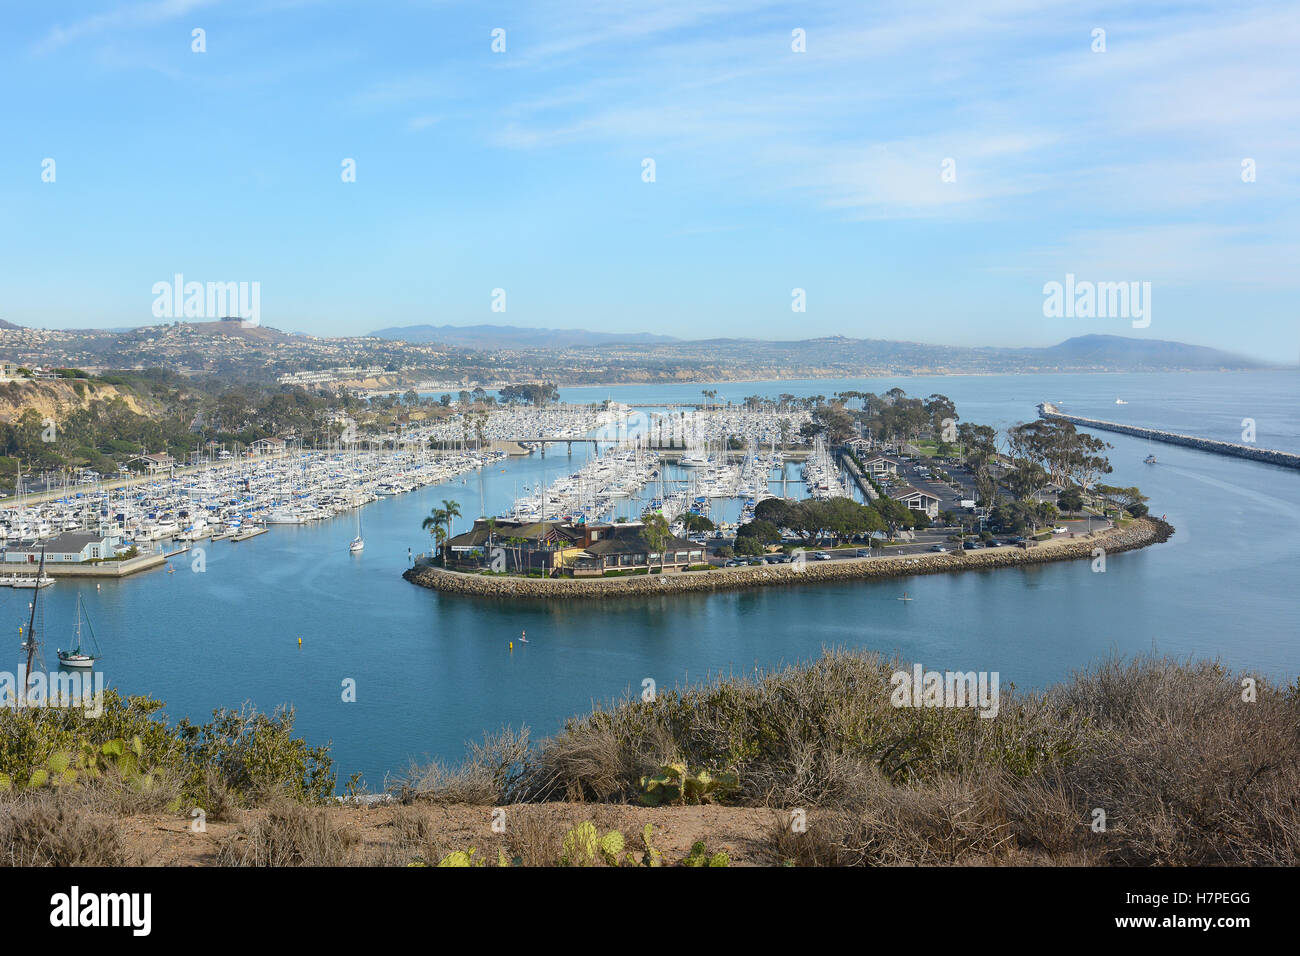 Dana Point Harbor in Orange County, California. Looking south from the bluffs that are home to a nature preservation area along Stock Photo